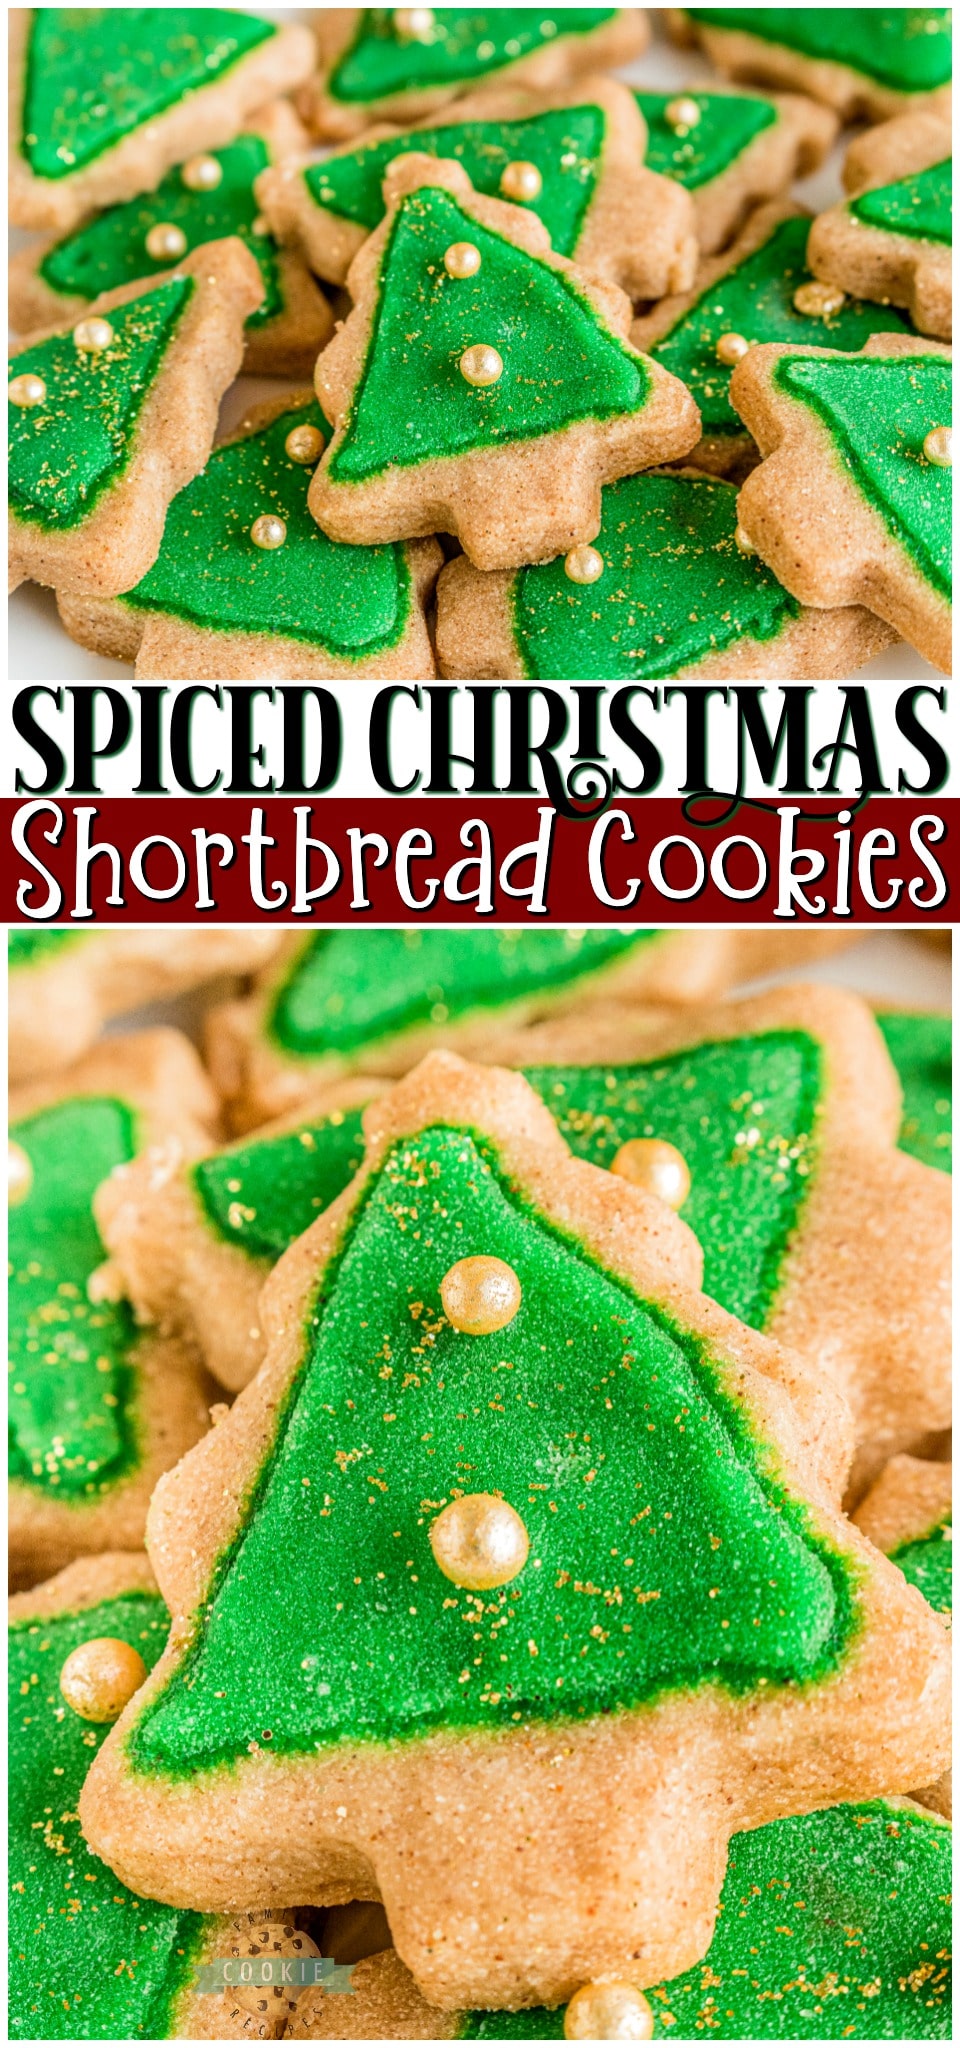 Spiced Christmas Shortbread Cookies made with cinnamon & allspice in the dough and topped with a simple icing recipe for perfect Christmas cookies! Buttery shortbread cookies with great flavor & texture for holiday baking.